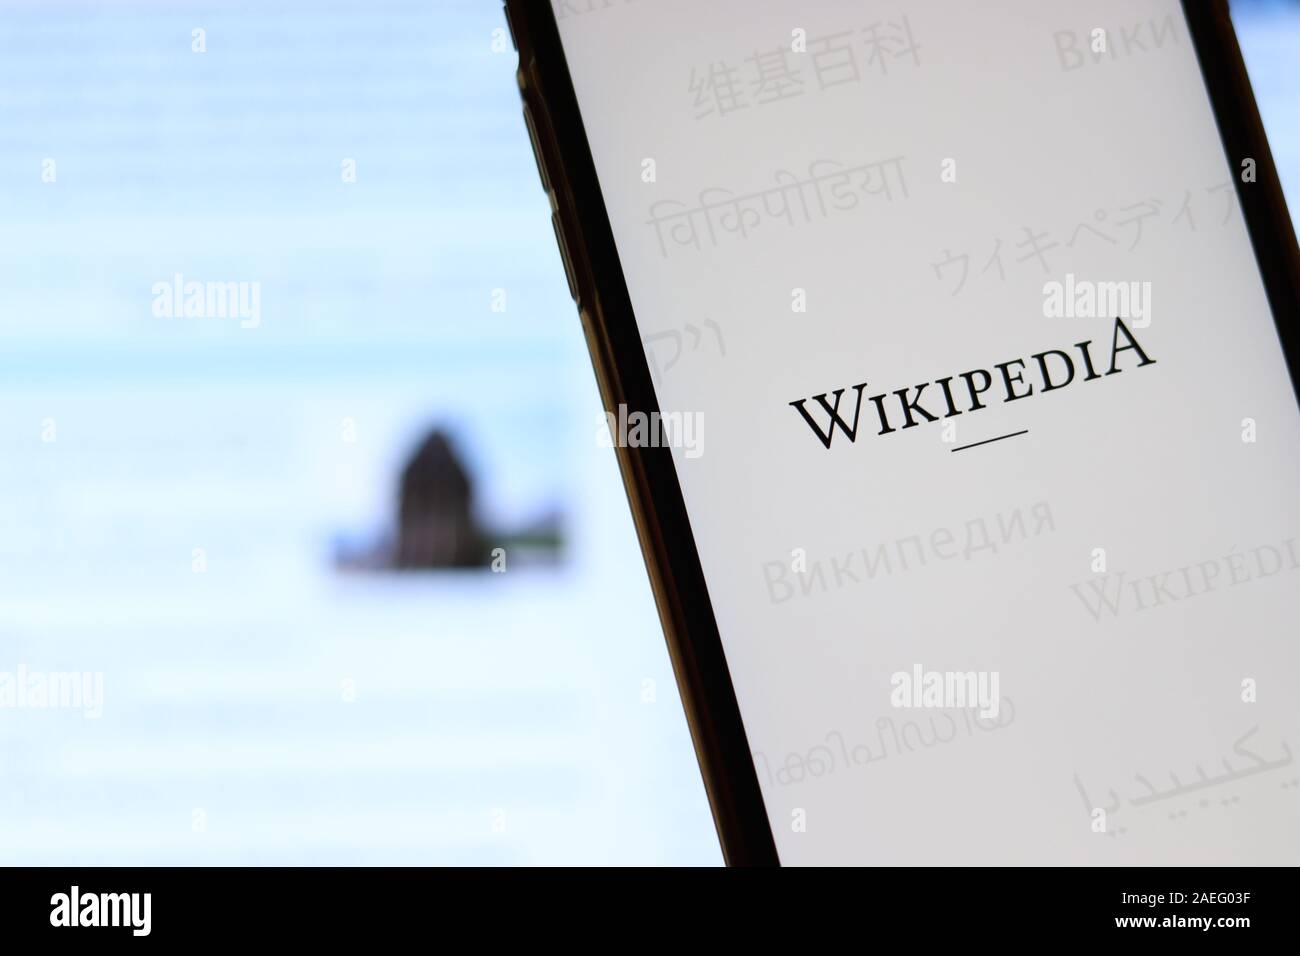 Los Angeles, California, USA - 21 November 2019: Wikipedia logo on phone screen with icon on laptop on blurry background, Illustrative Editorial. Stock Photo